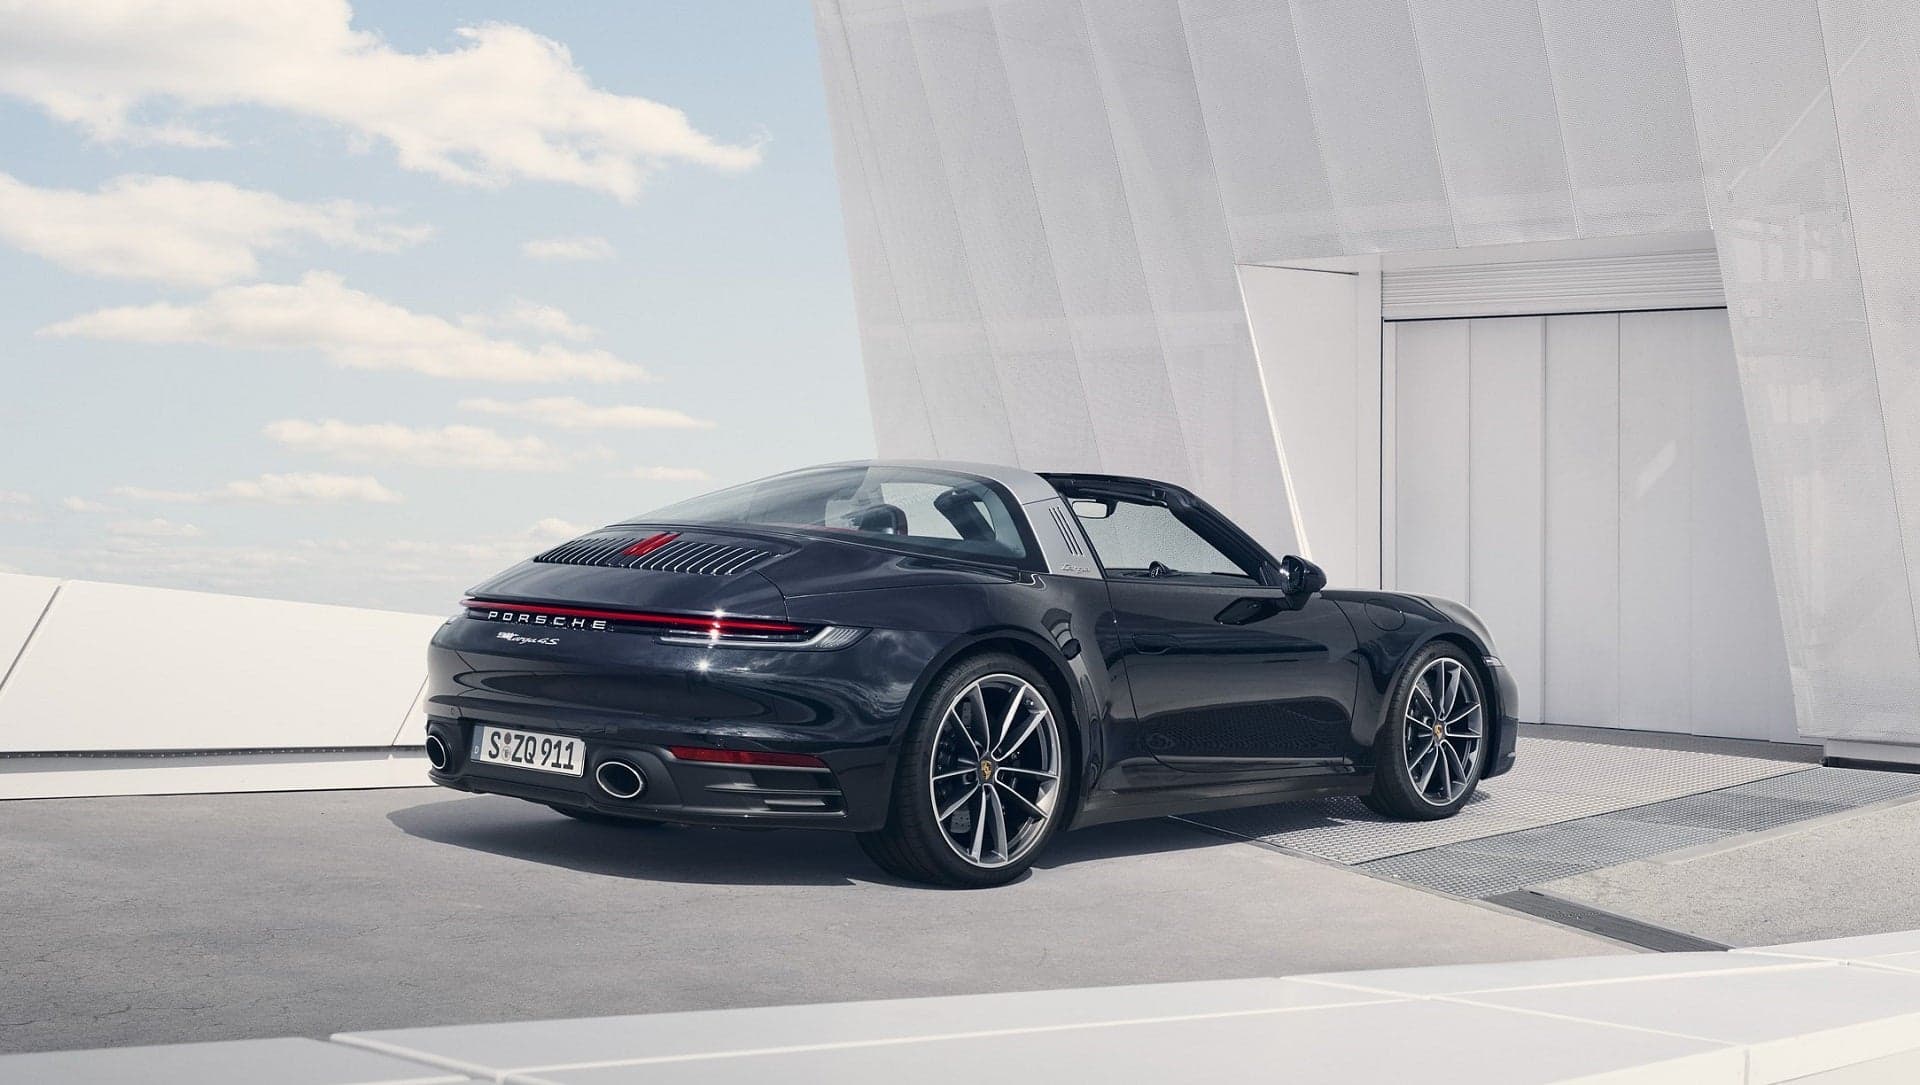 2021 Porsche 911 Targa Is Back With a Manual and That Crazy Folding Roof